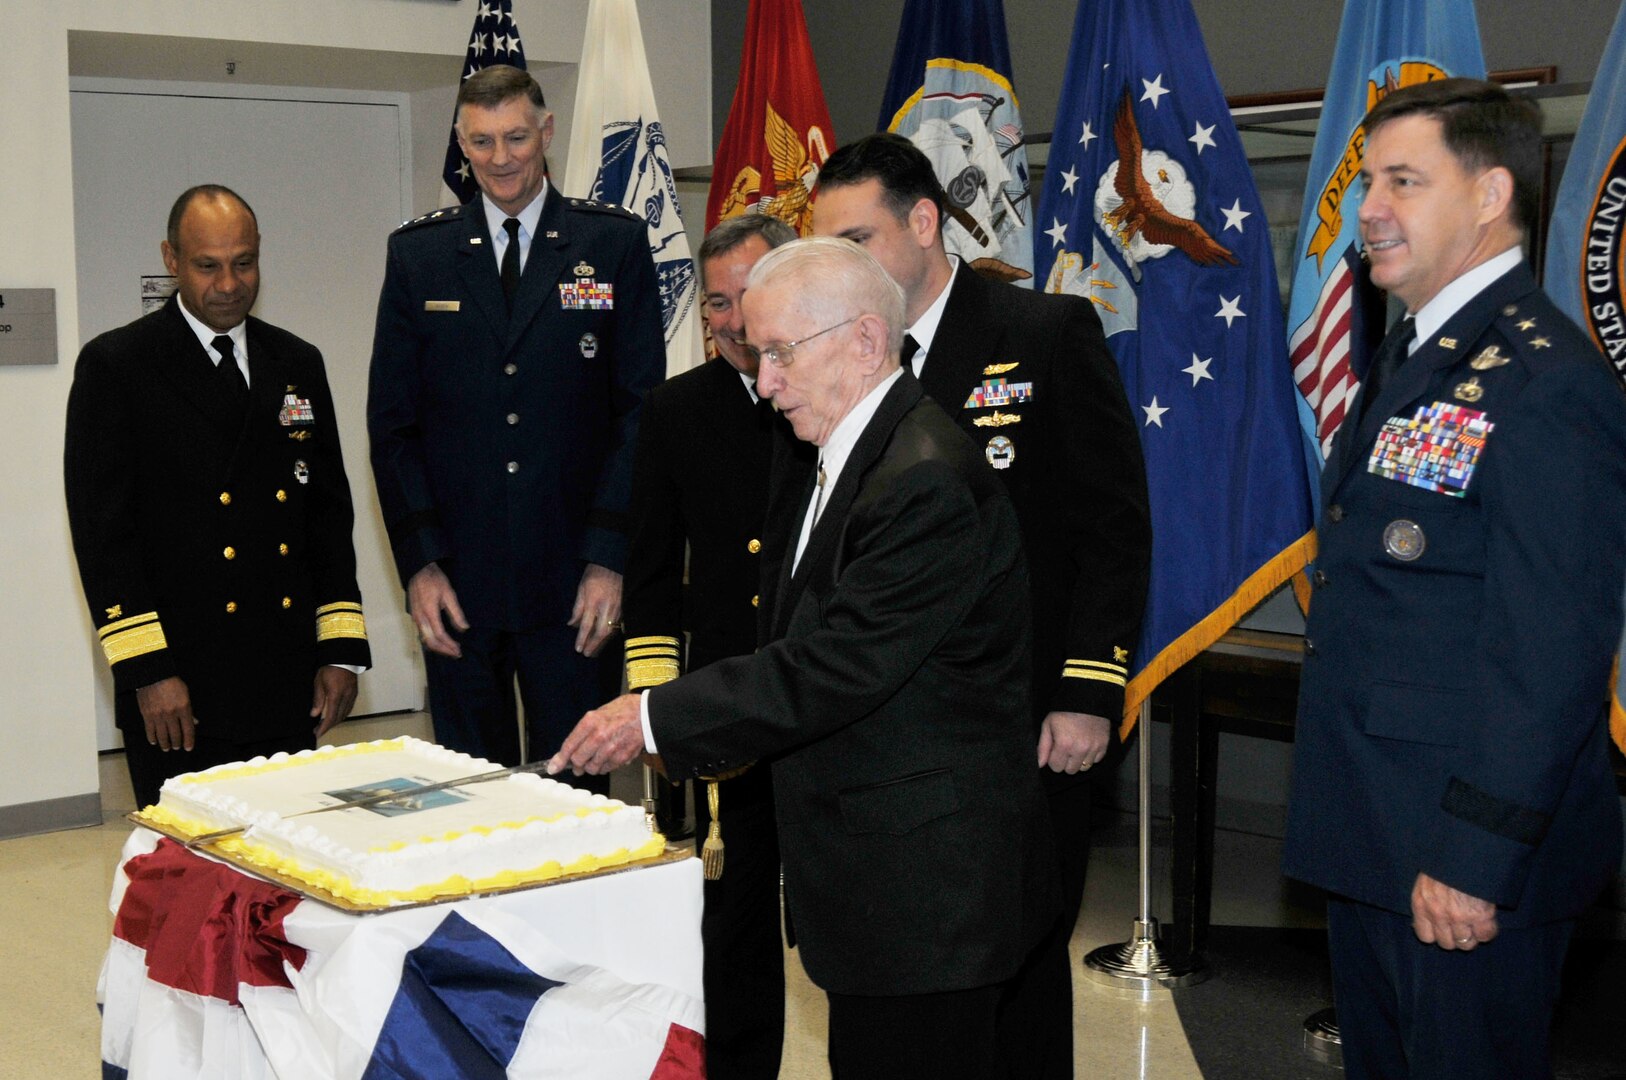 A Navy birthday cake is cut by senior leaders and the oldest and youngest sailors present during a celebration of the service’s 240th birthday at the McNamara Headquarters Complex Oct. 13.